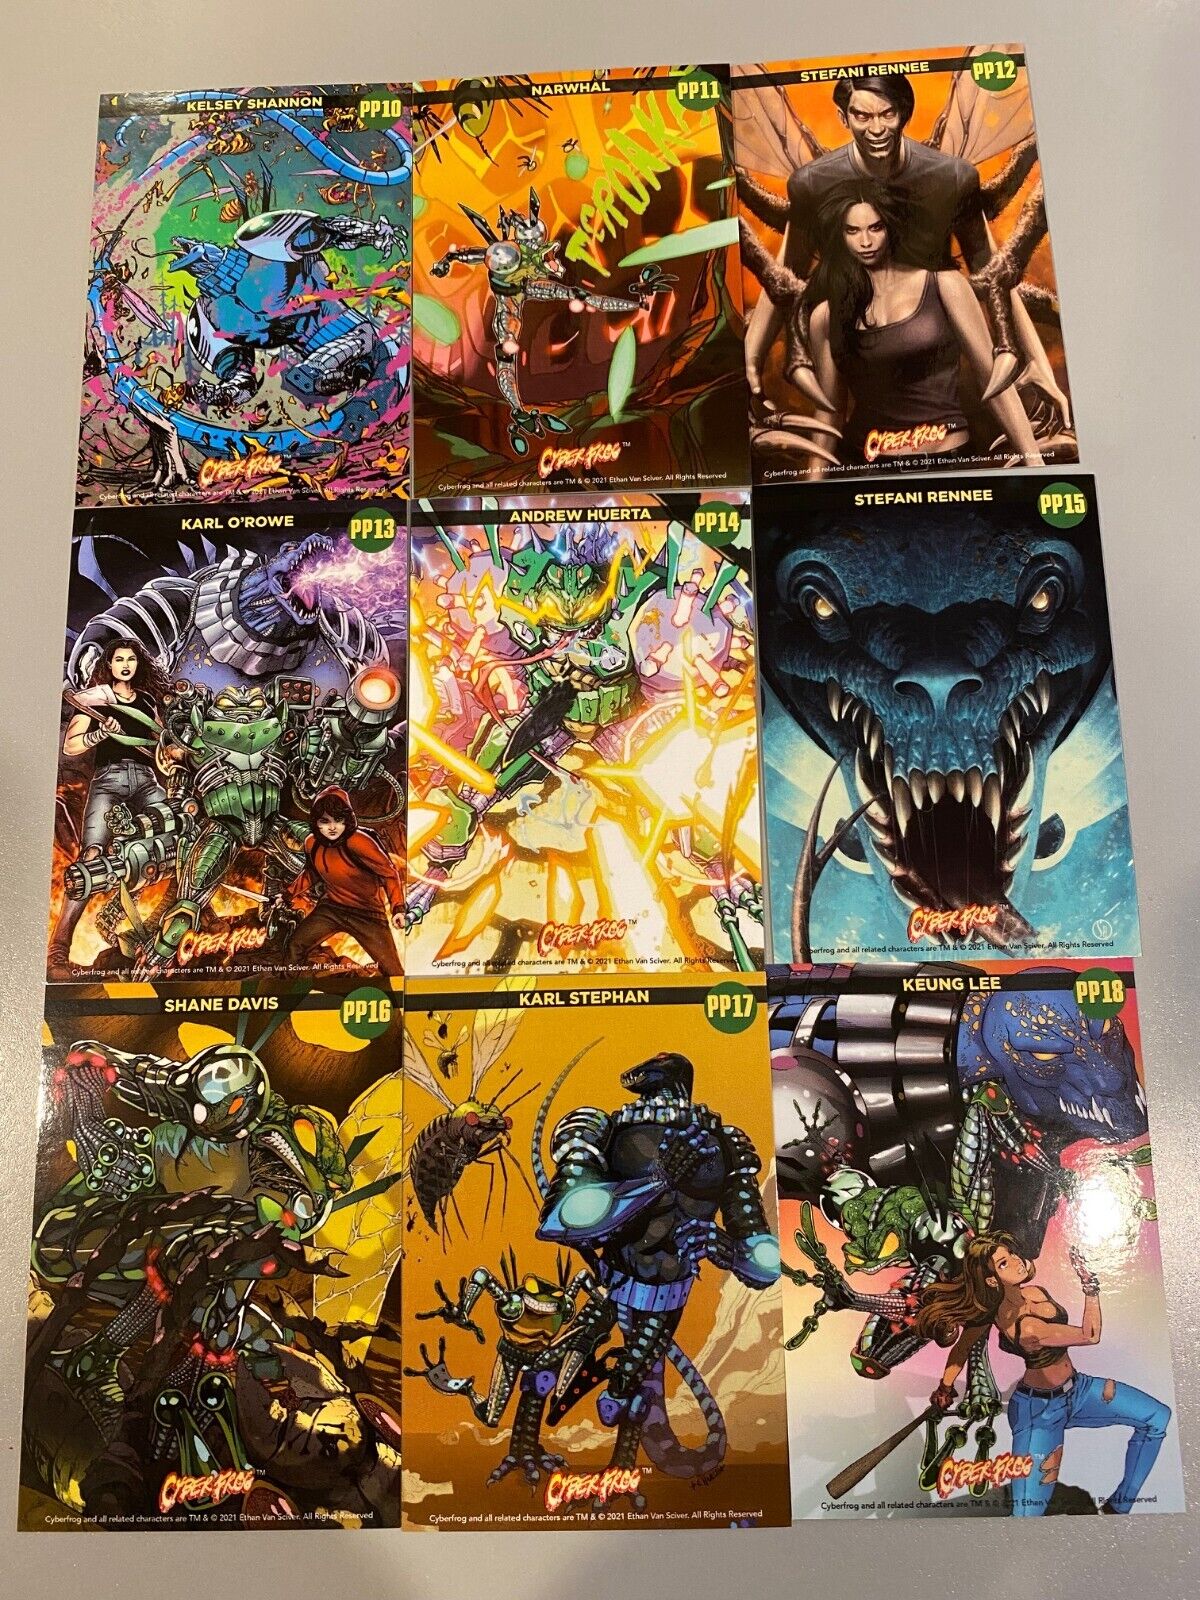 CYBERFROG PATREON PUZZLE #2 PP10-18 trading card set 9 CARDS.